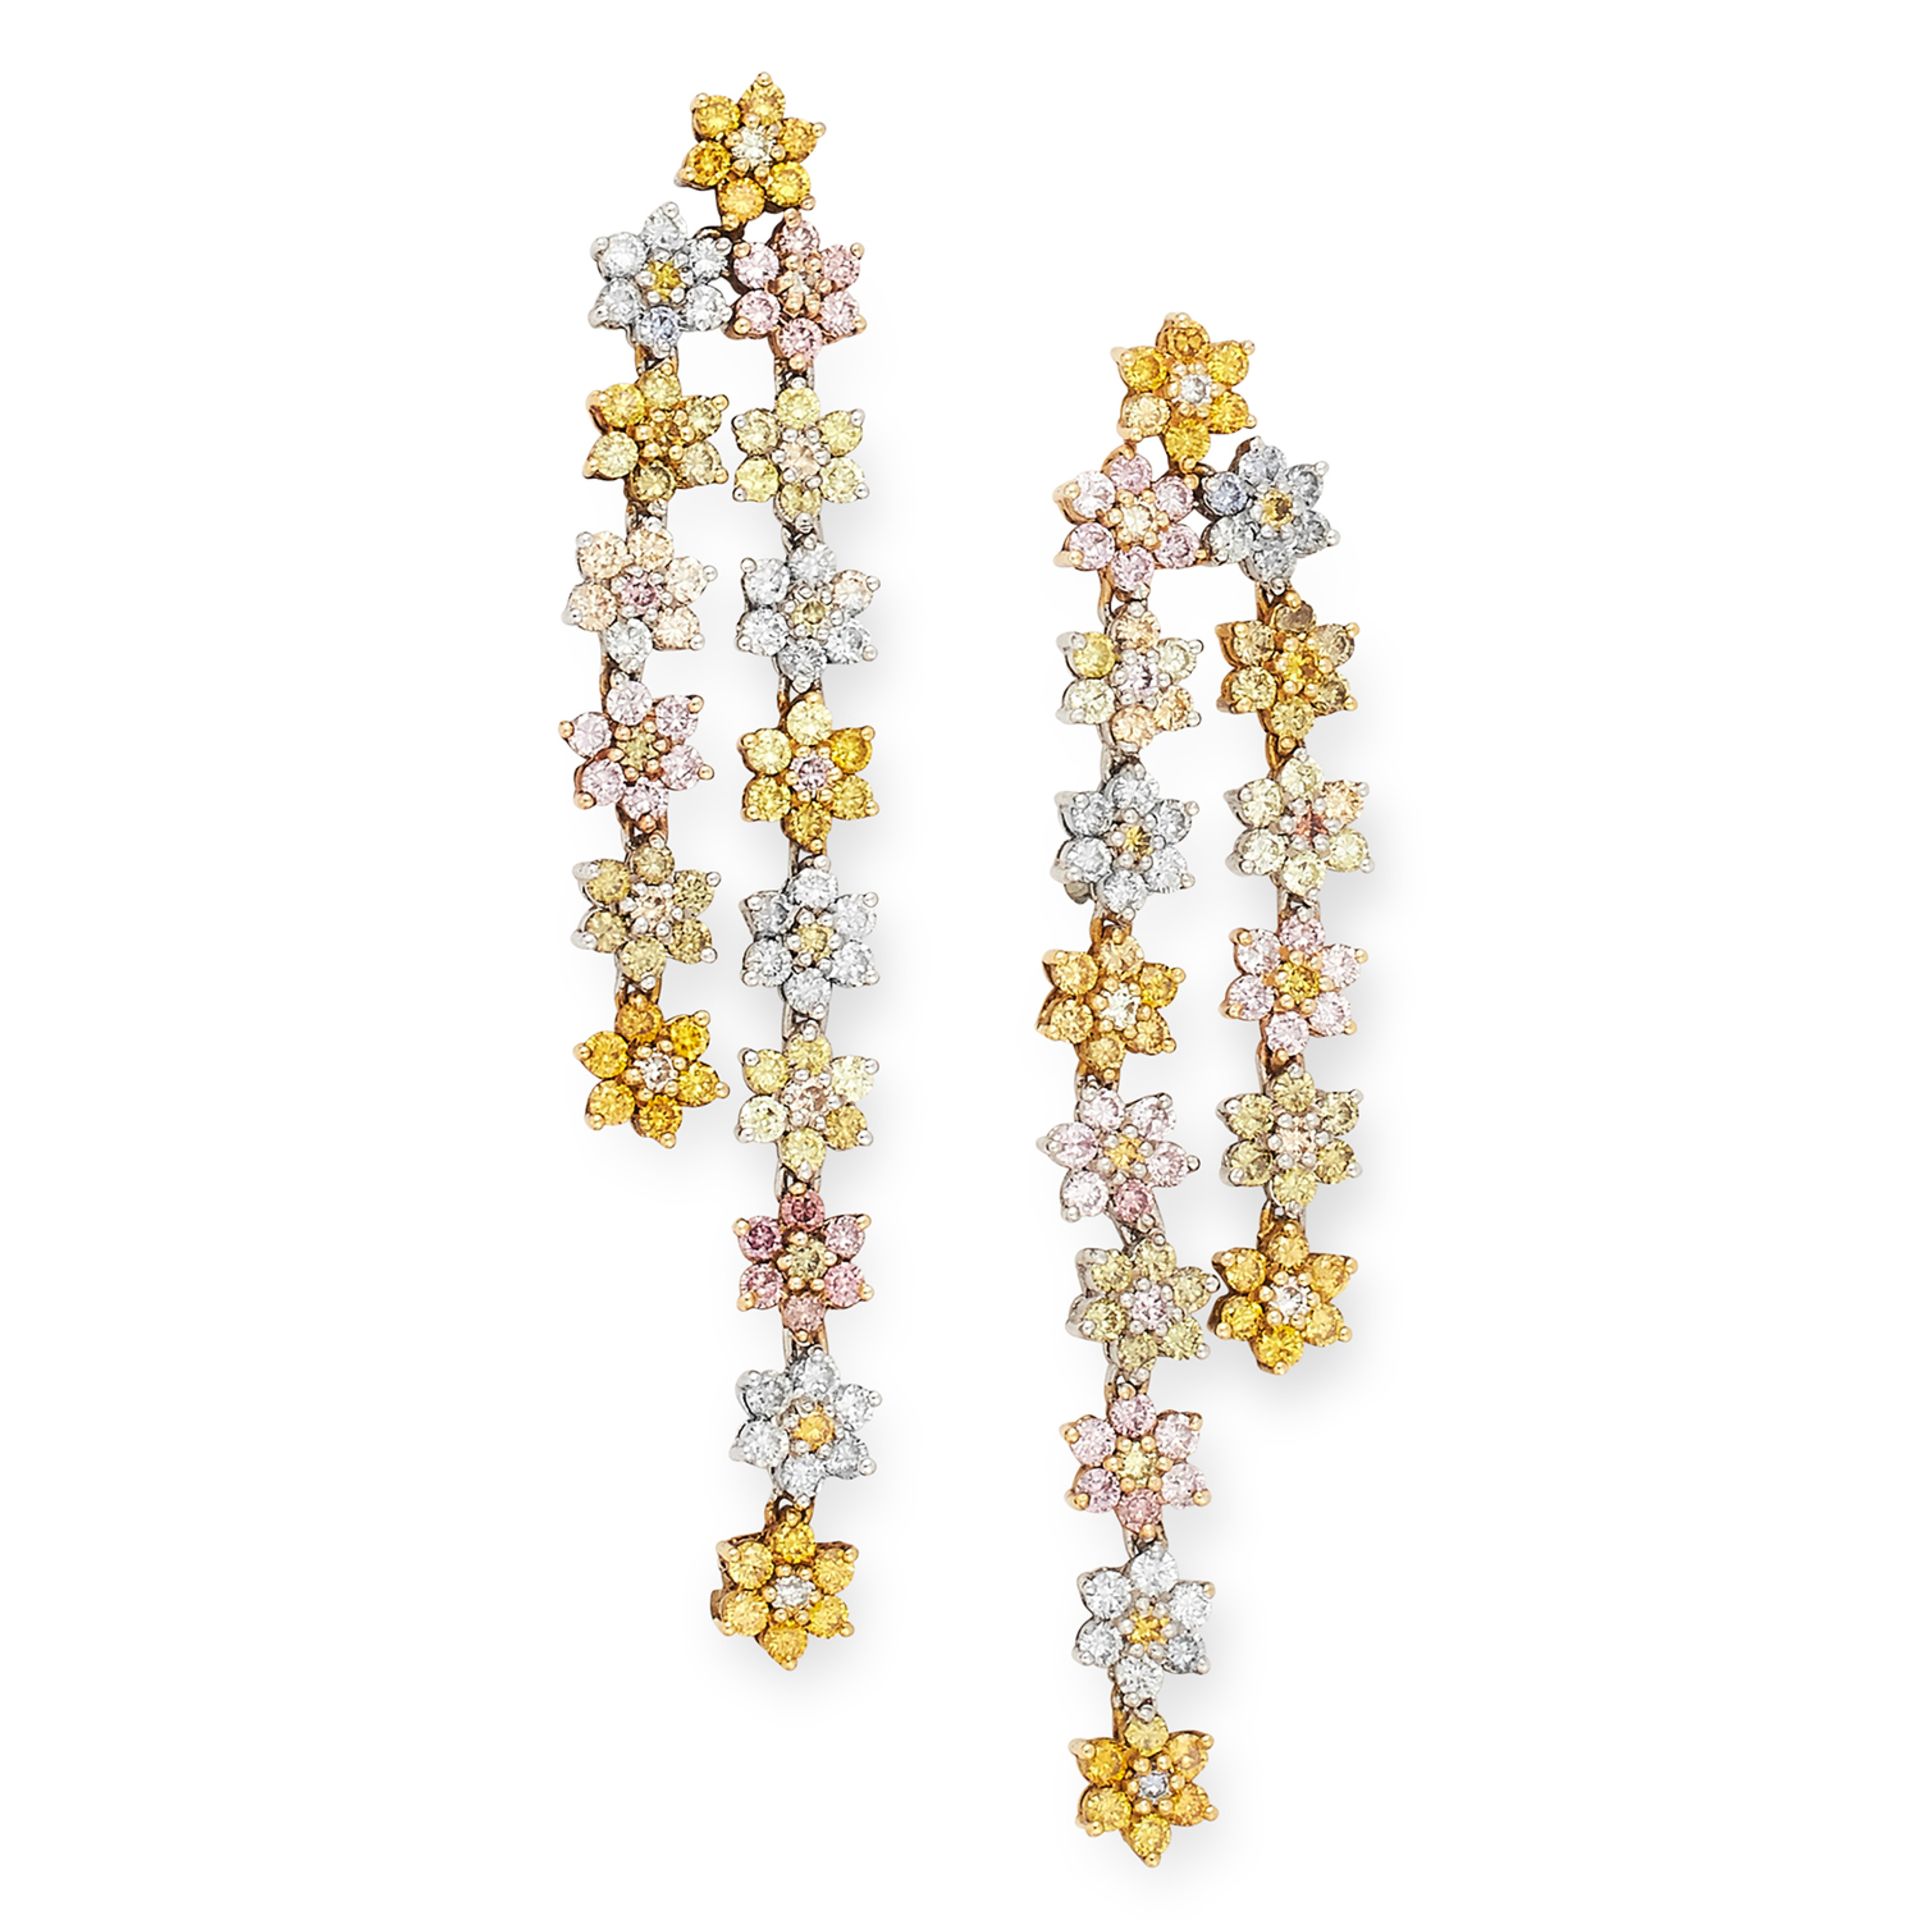 YELLOW, PINK AND WHITE DIAMOND DROP EARRINGS each set with a floral cluster of round cut yellow,